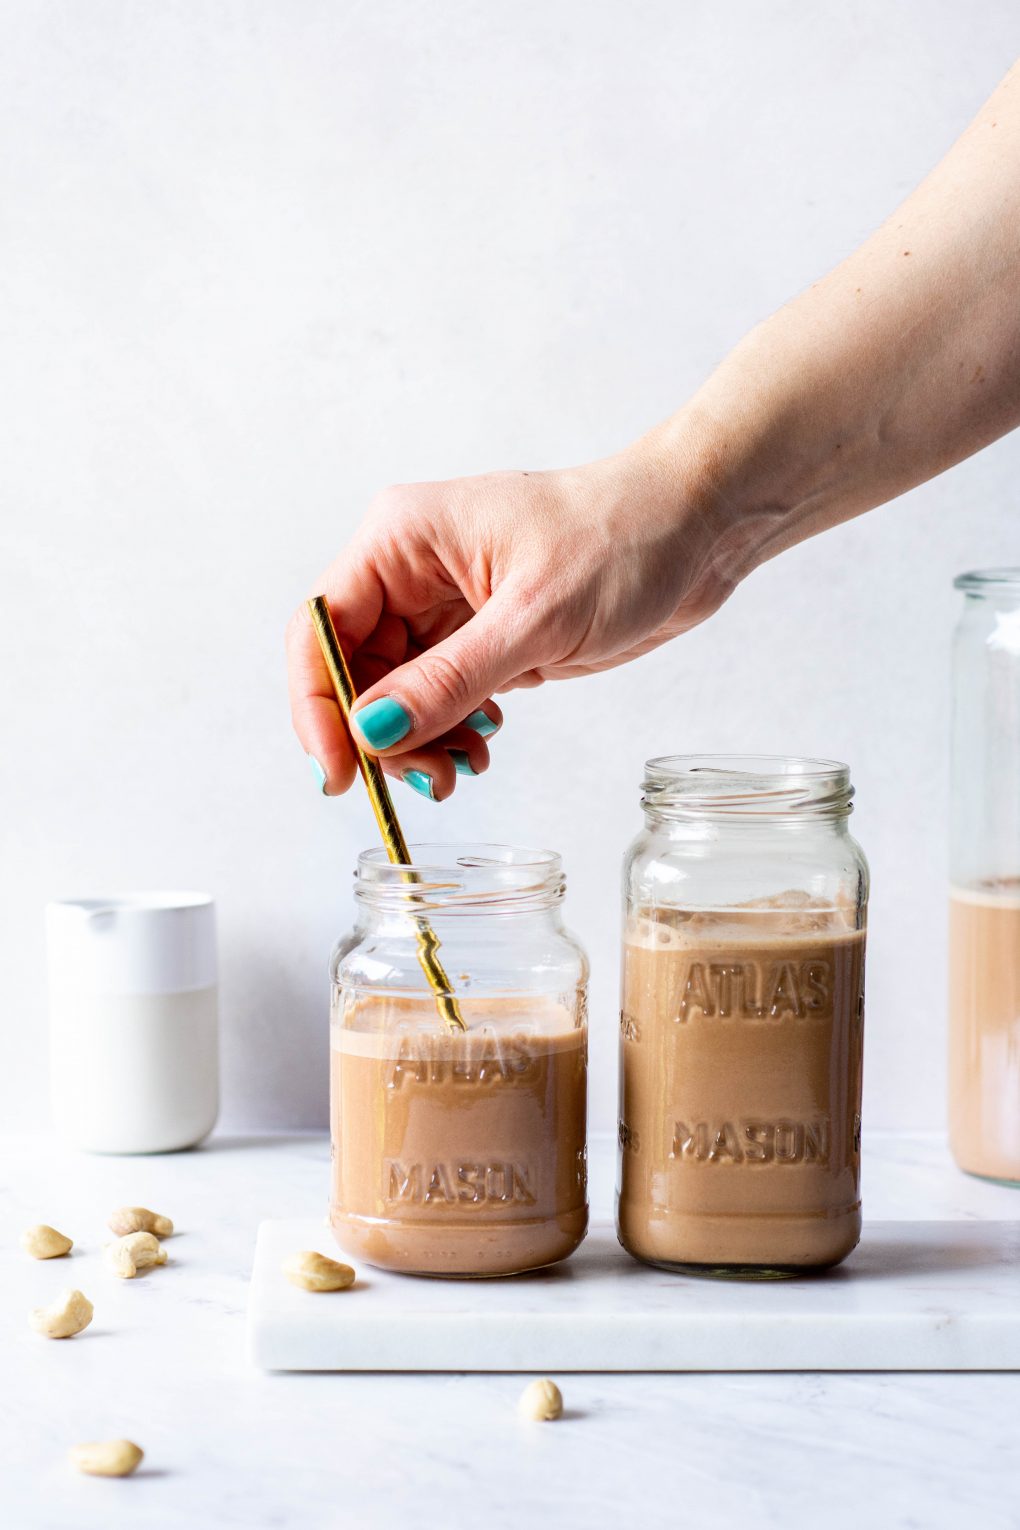 Placing a straw in one of two side by side glasses of chocolate cashew milk on a white background